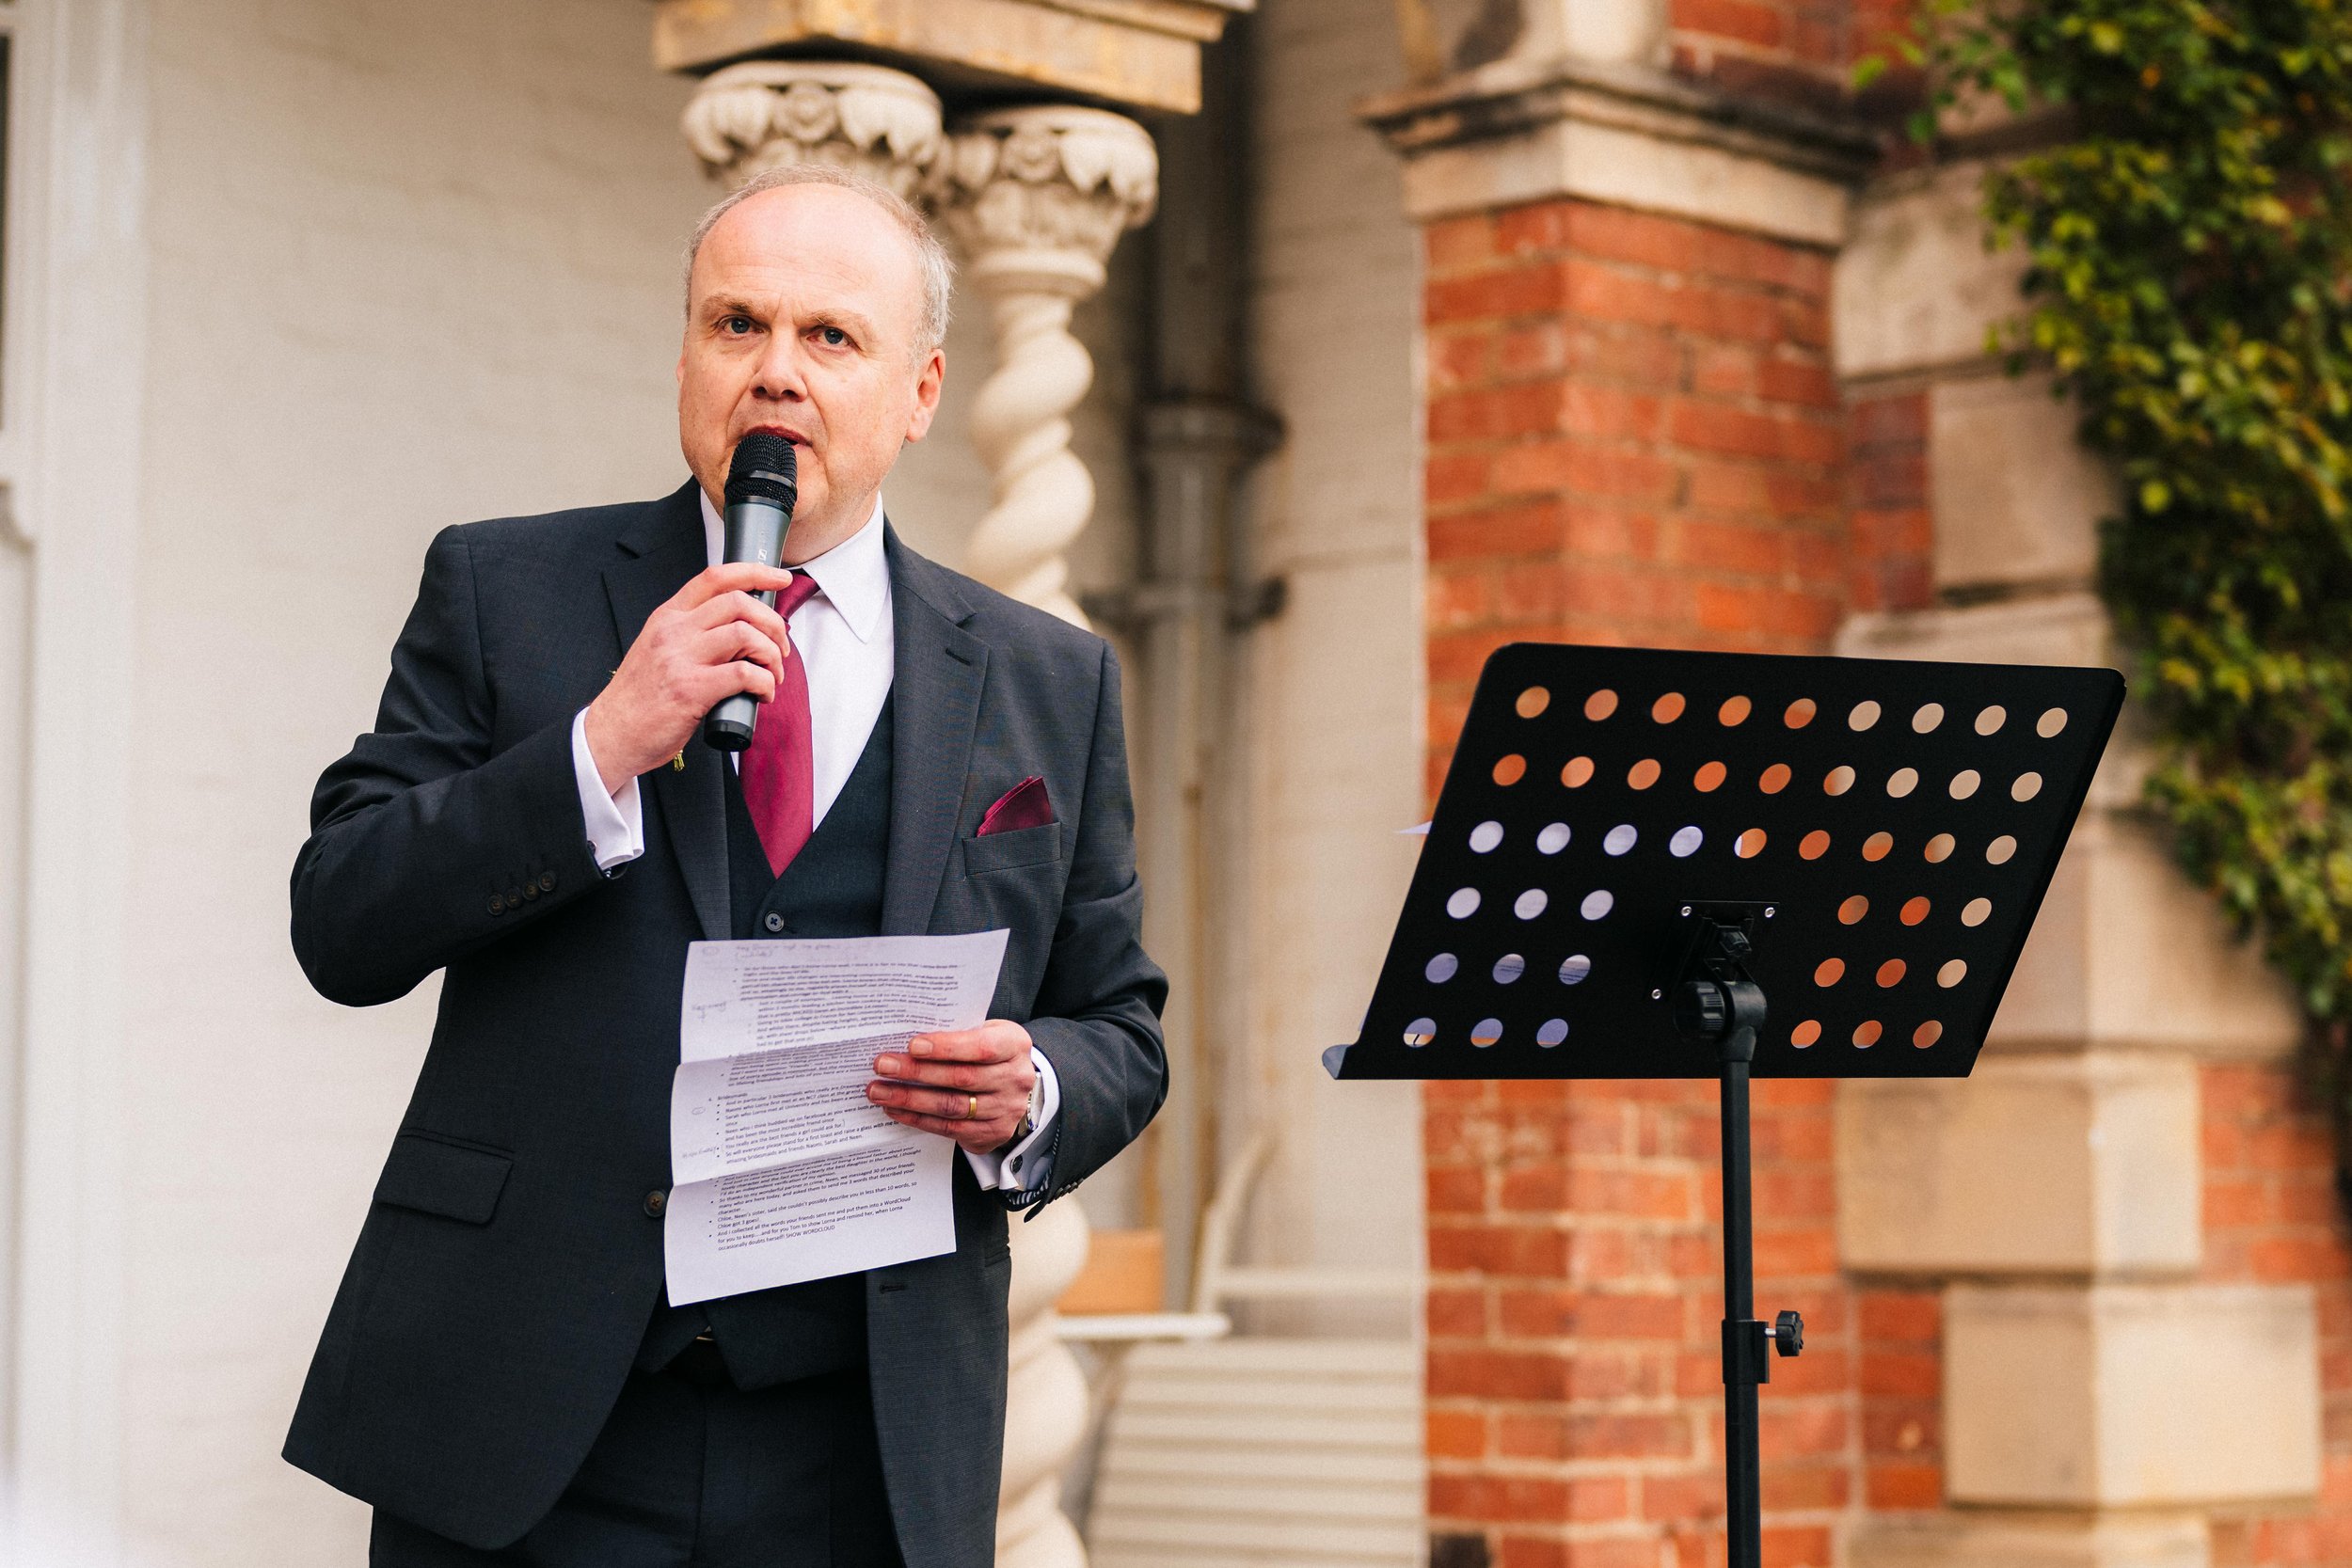 SUTTON BONINGTON HALL WEDDING PHOTOGRAPHY - father of the bride gives his wedding speech in the gardens